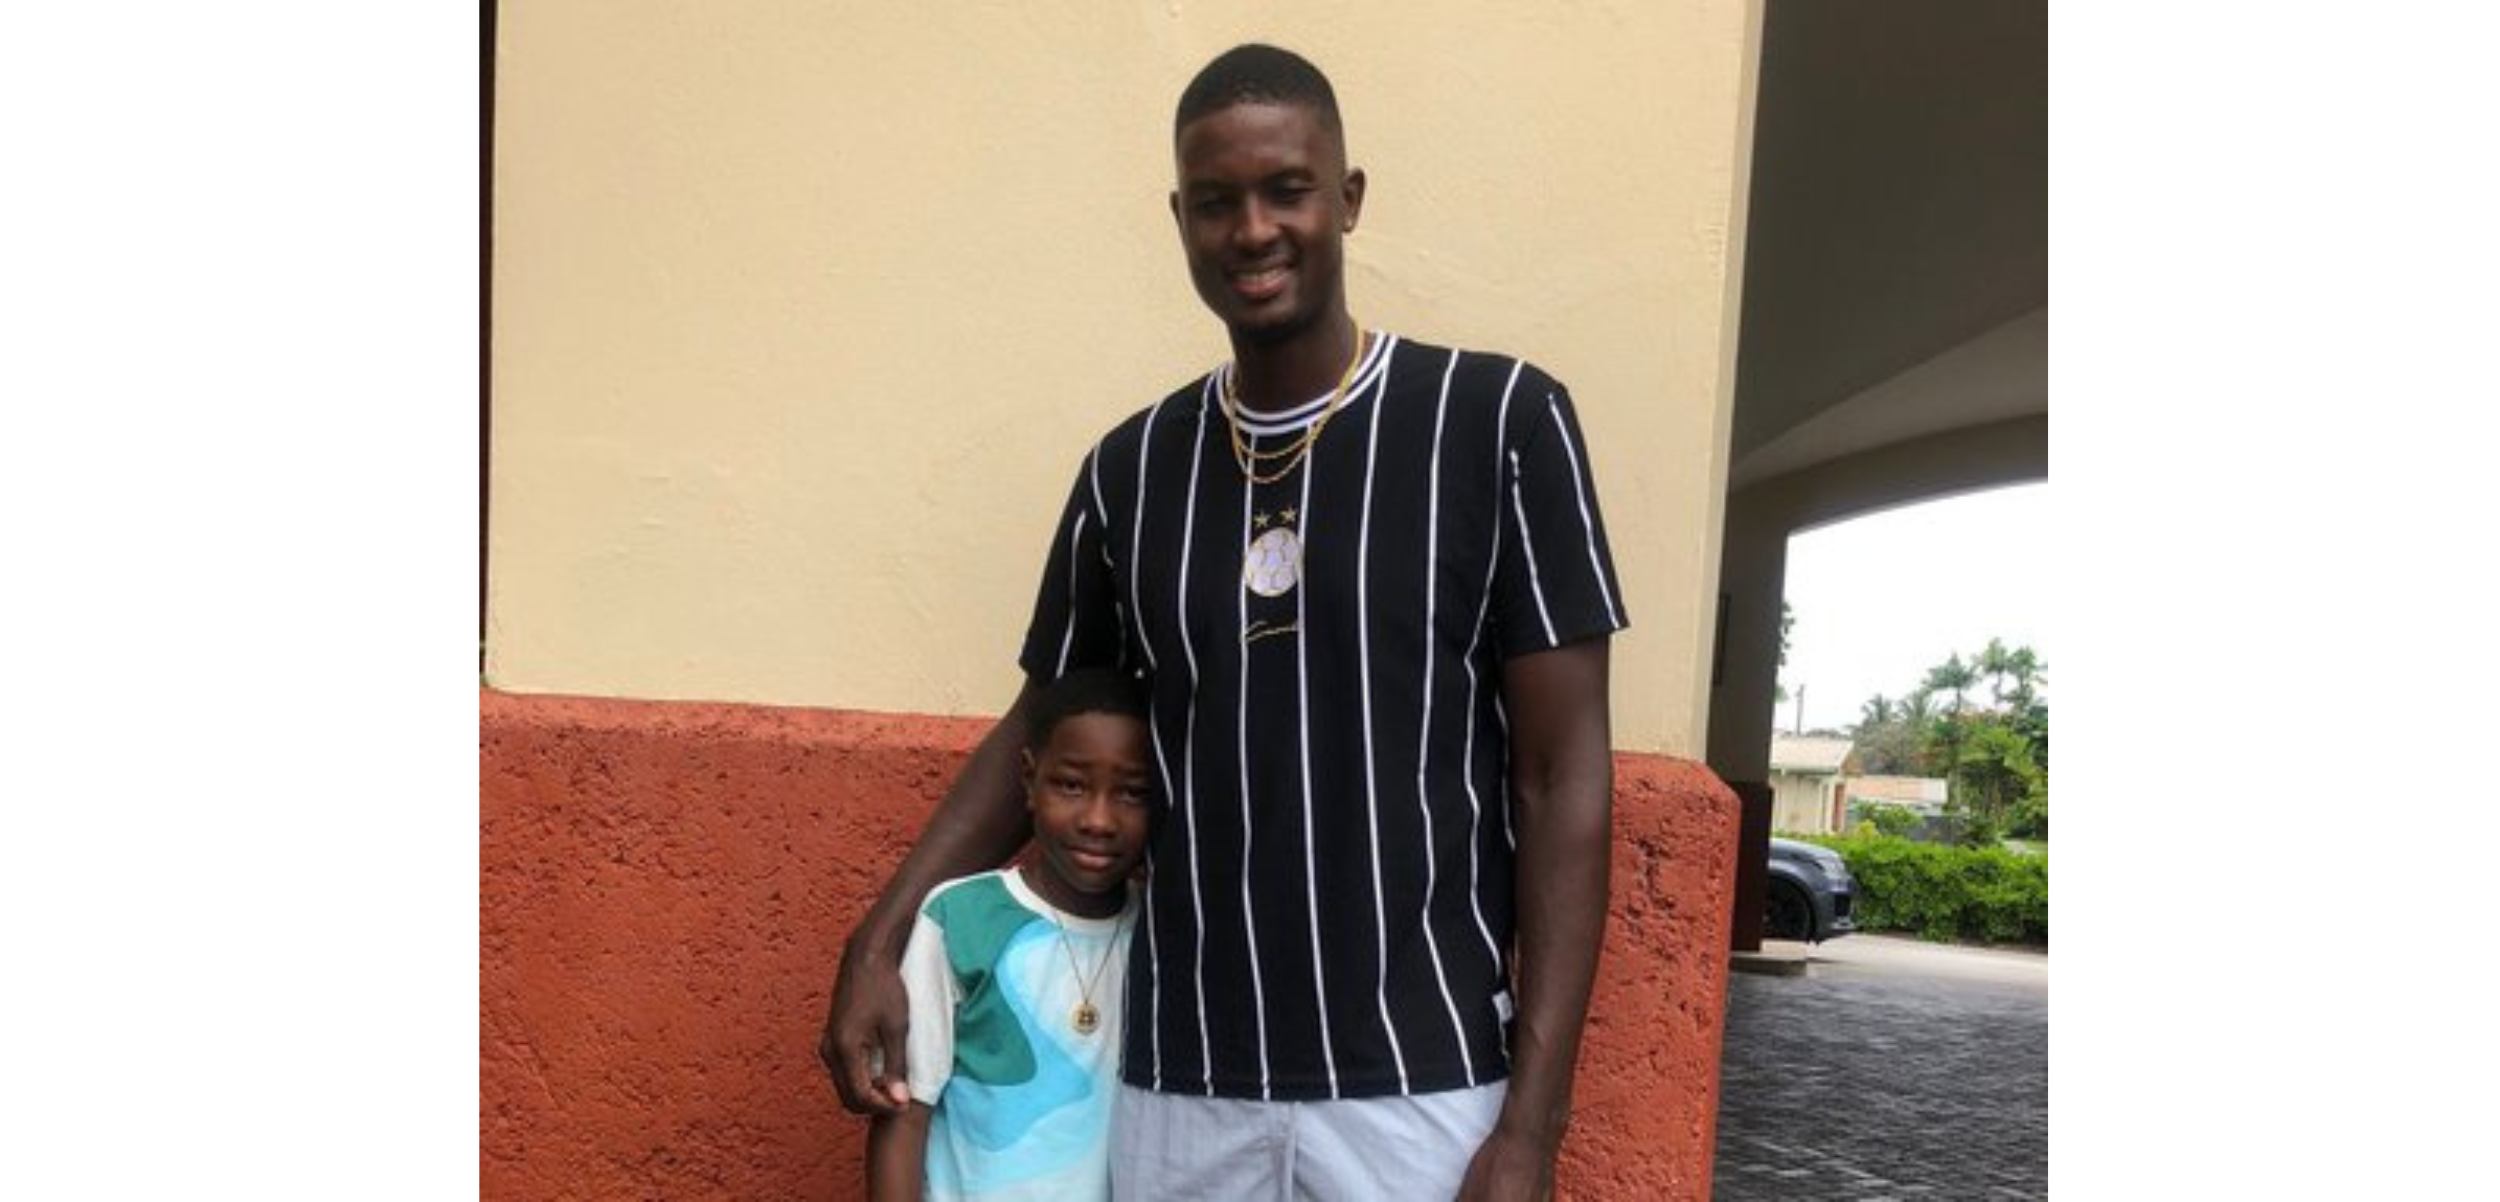 CWI: 10-year-old Jediah’s birthday is made when he meets hero Jason Holder